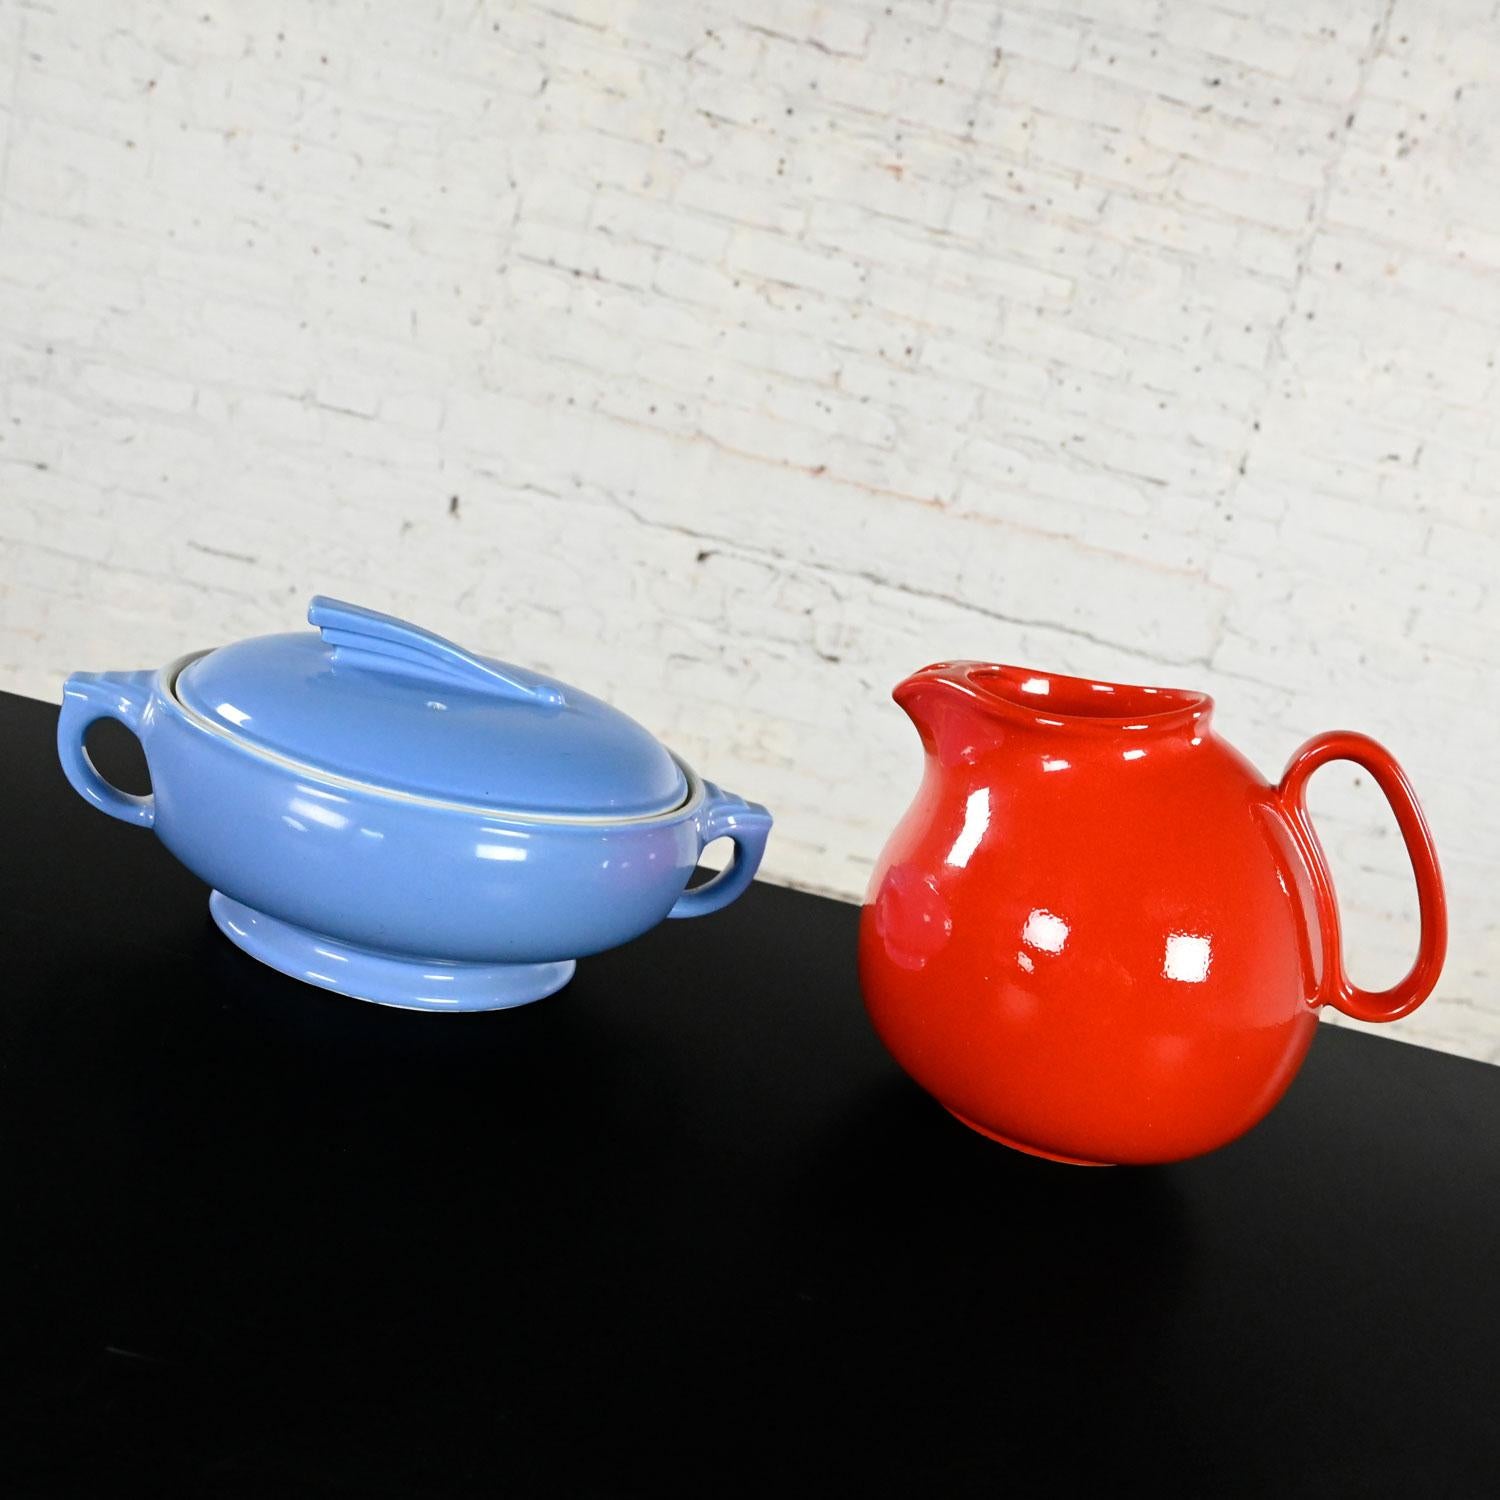 Vintage Red Pitcher by Waechtersbach Germany & Blue Hall Sundial Casserole Dish For Sale 5